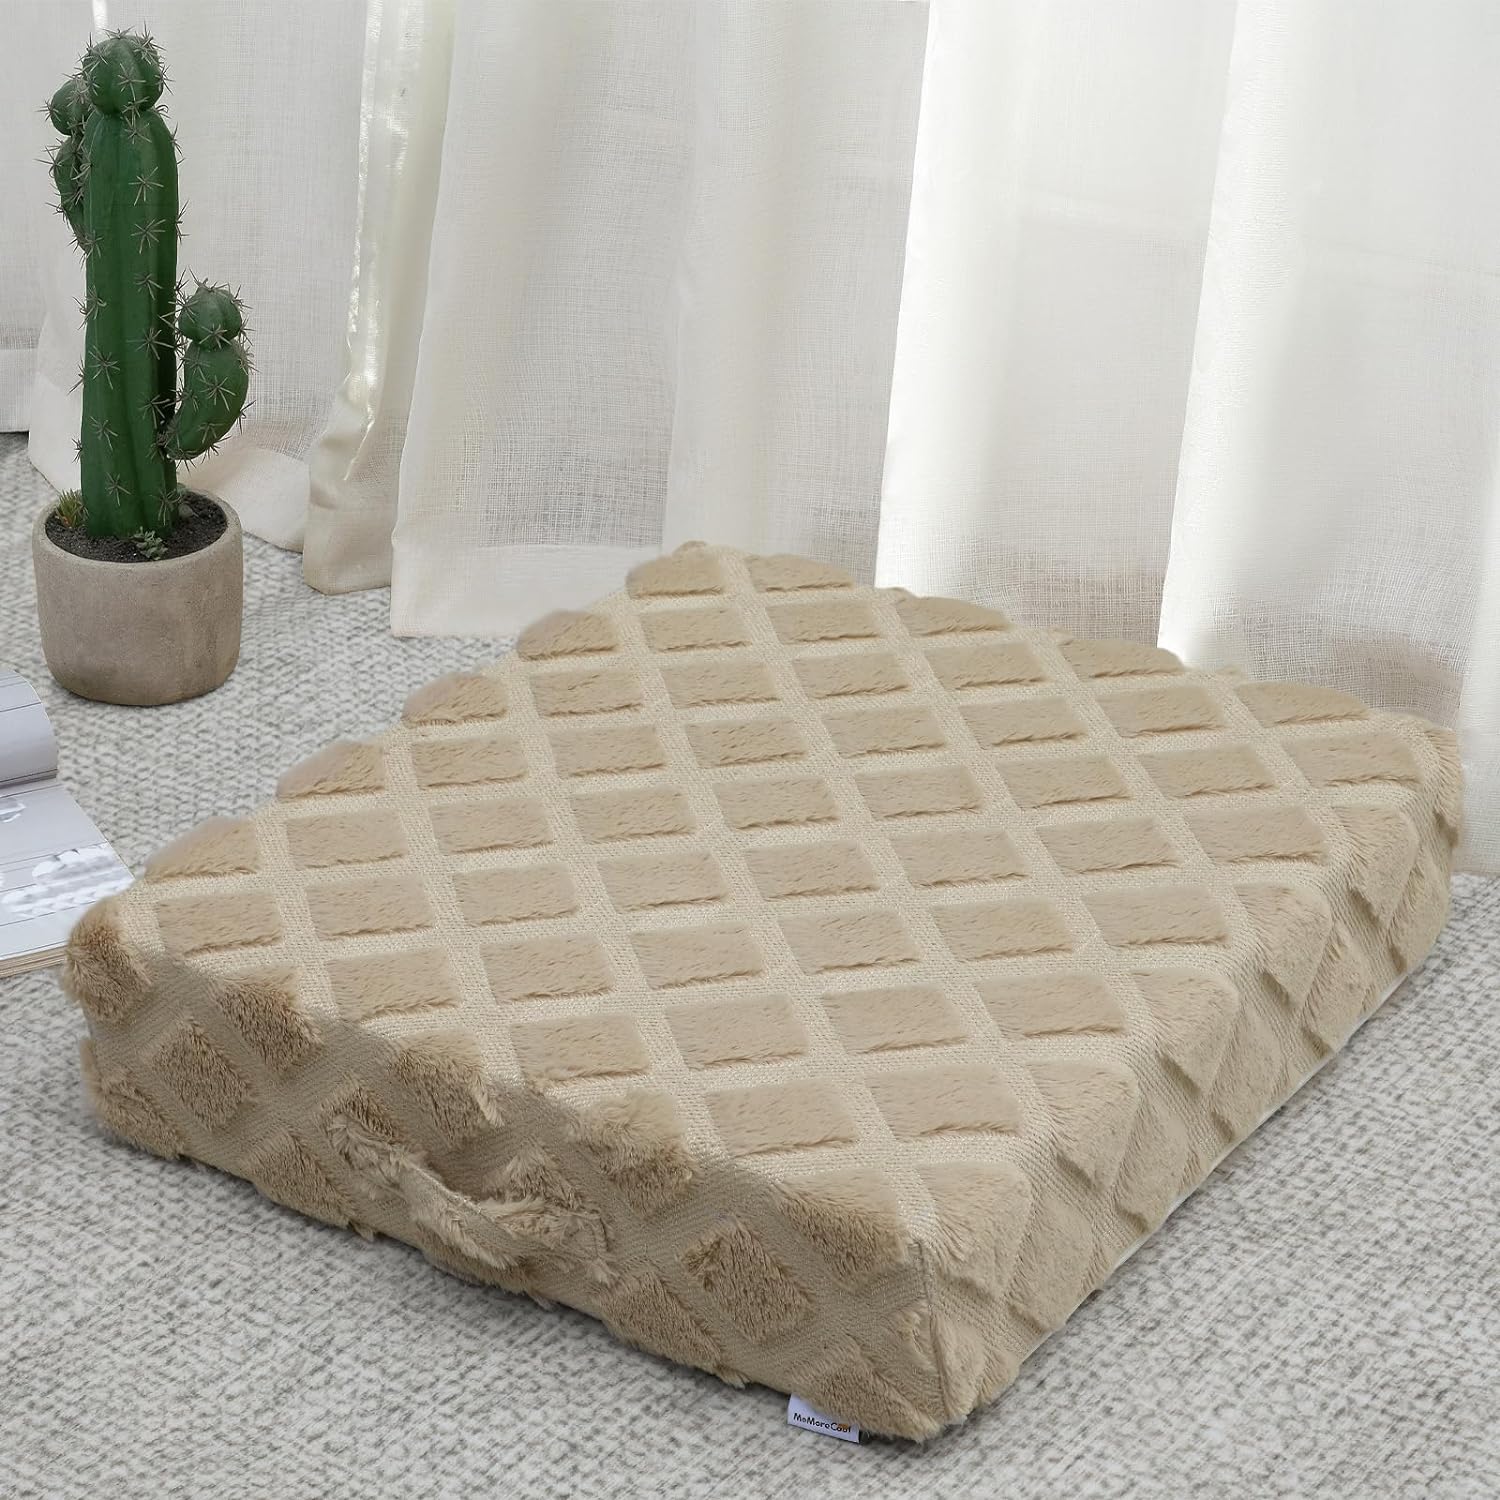 MeMoreCool Square Floor Pillow for Adults Kids, Large Floor Cushion for Sitting Yoga, Big Pillow for Floor Seating, Boho Meditation Pillow Floor Seat Cushion with Thick Foam & Tufted Cover, Khaki